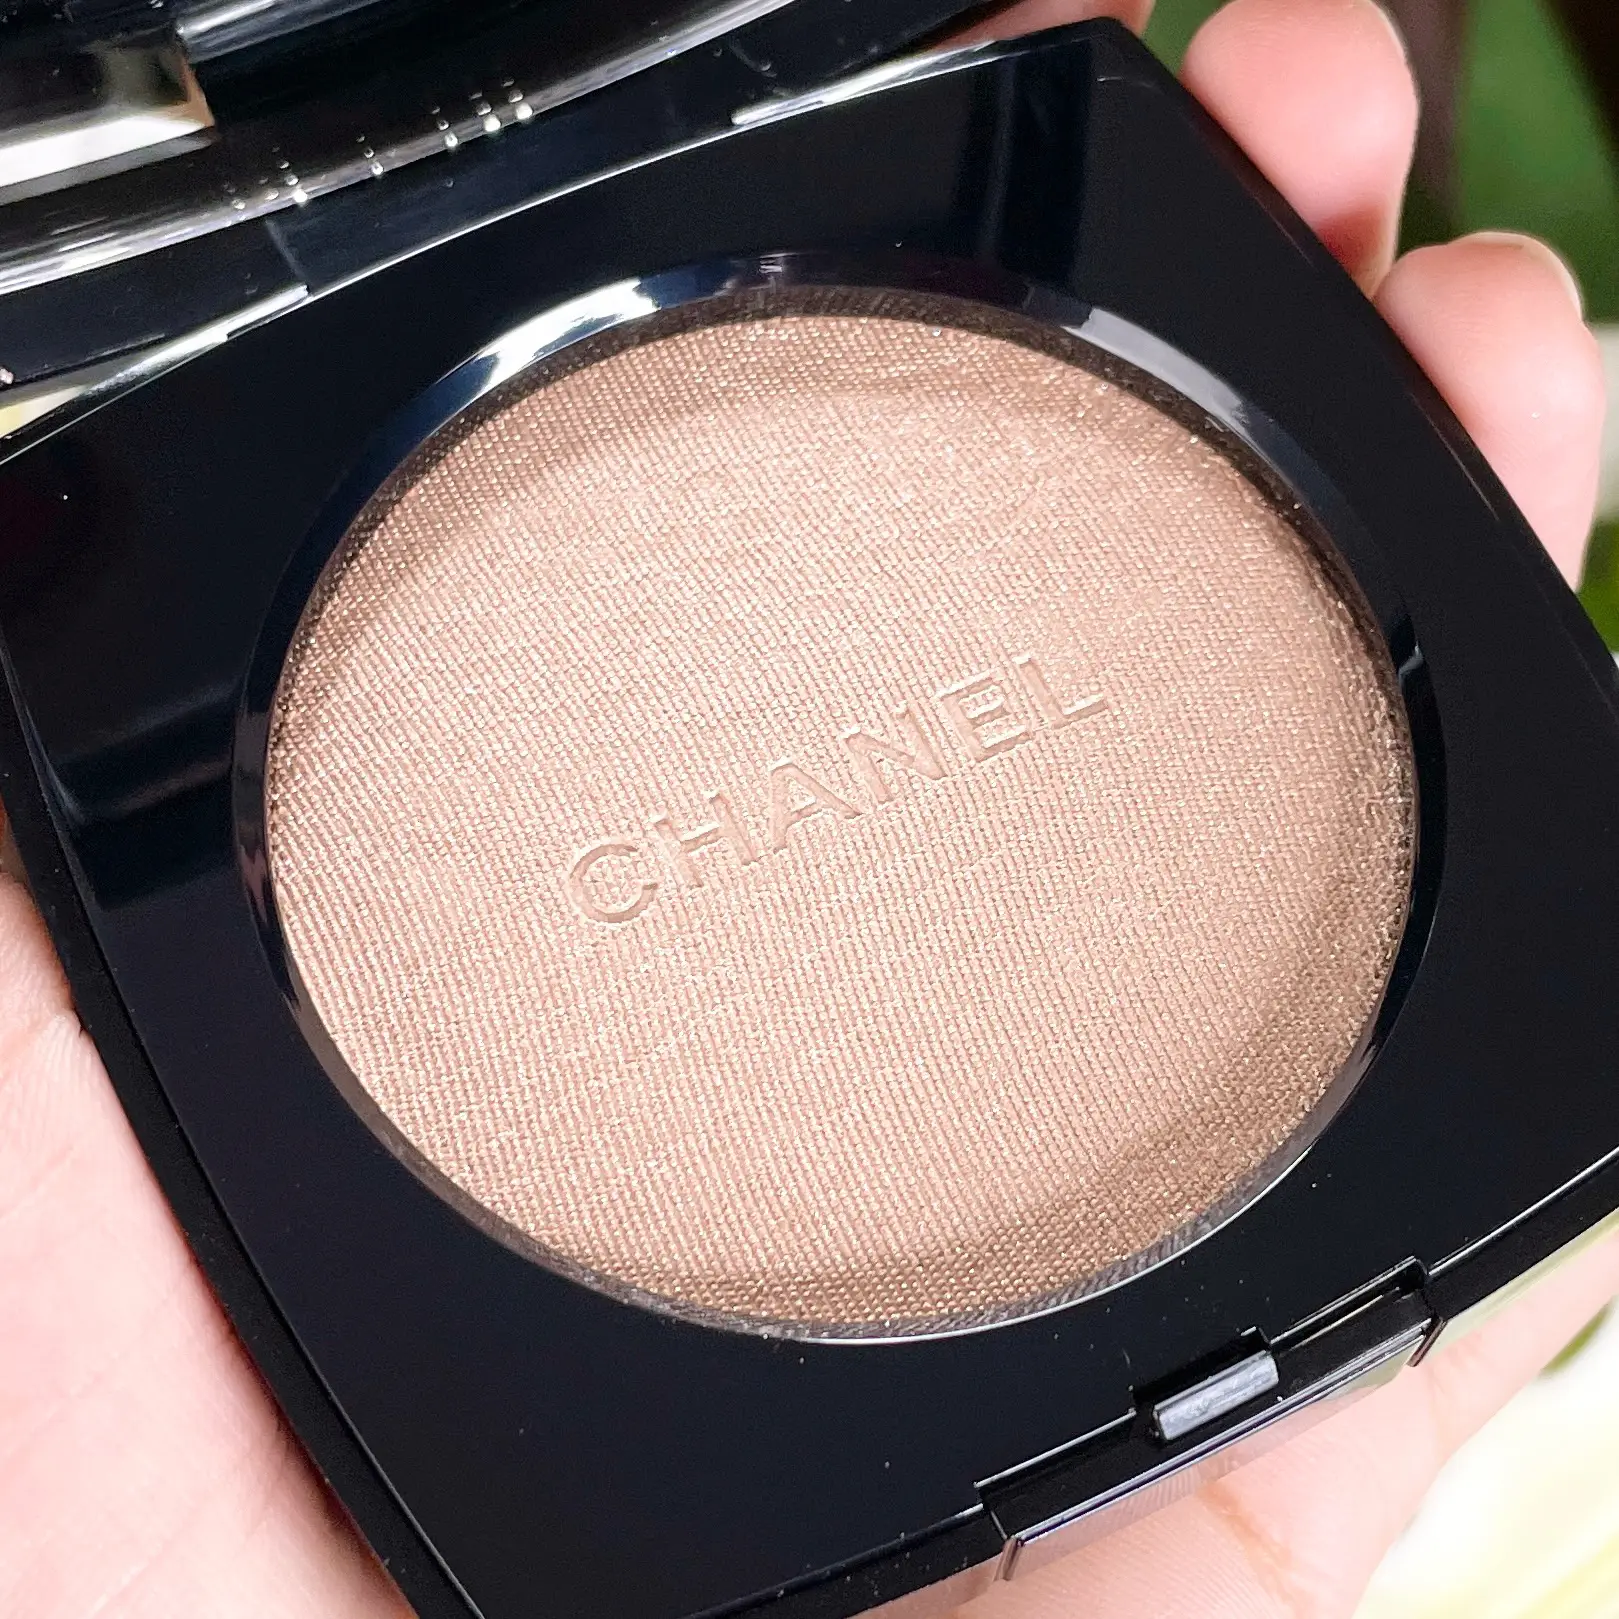 Chanel Poudre Lumiere สี 10 Ivory Gold ✨, Gallery posted by NattapornJade